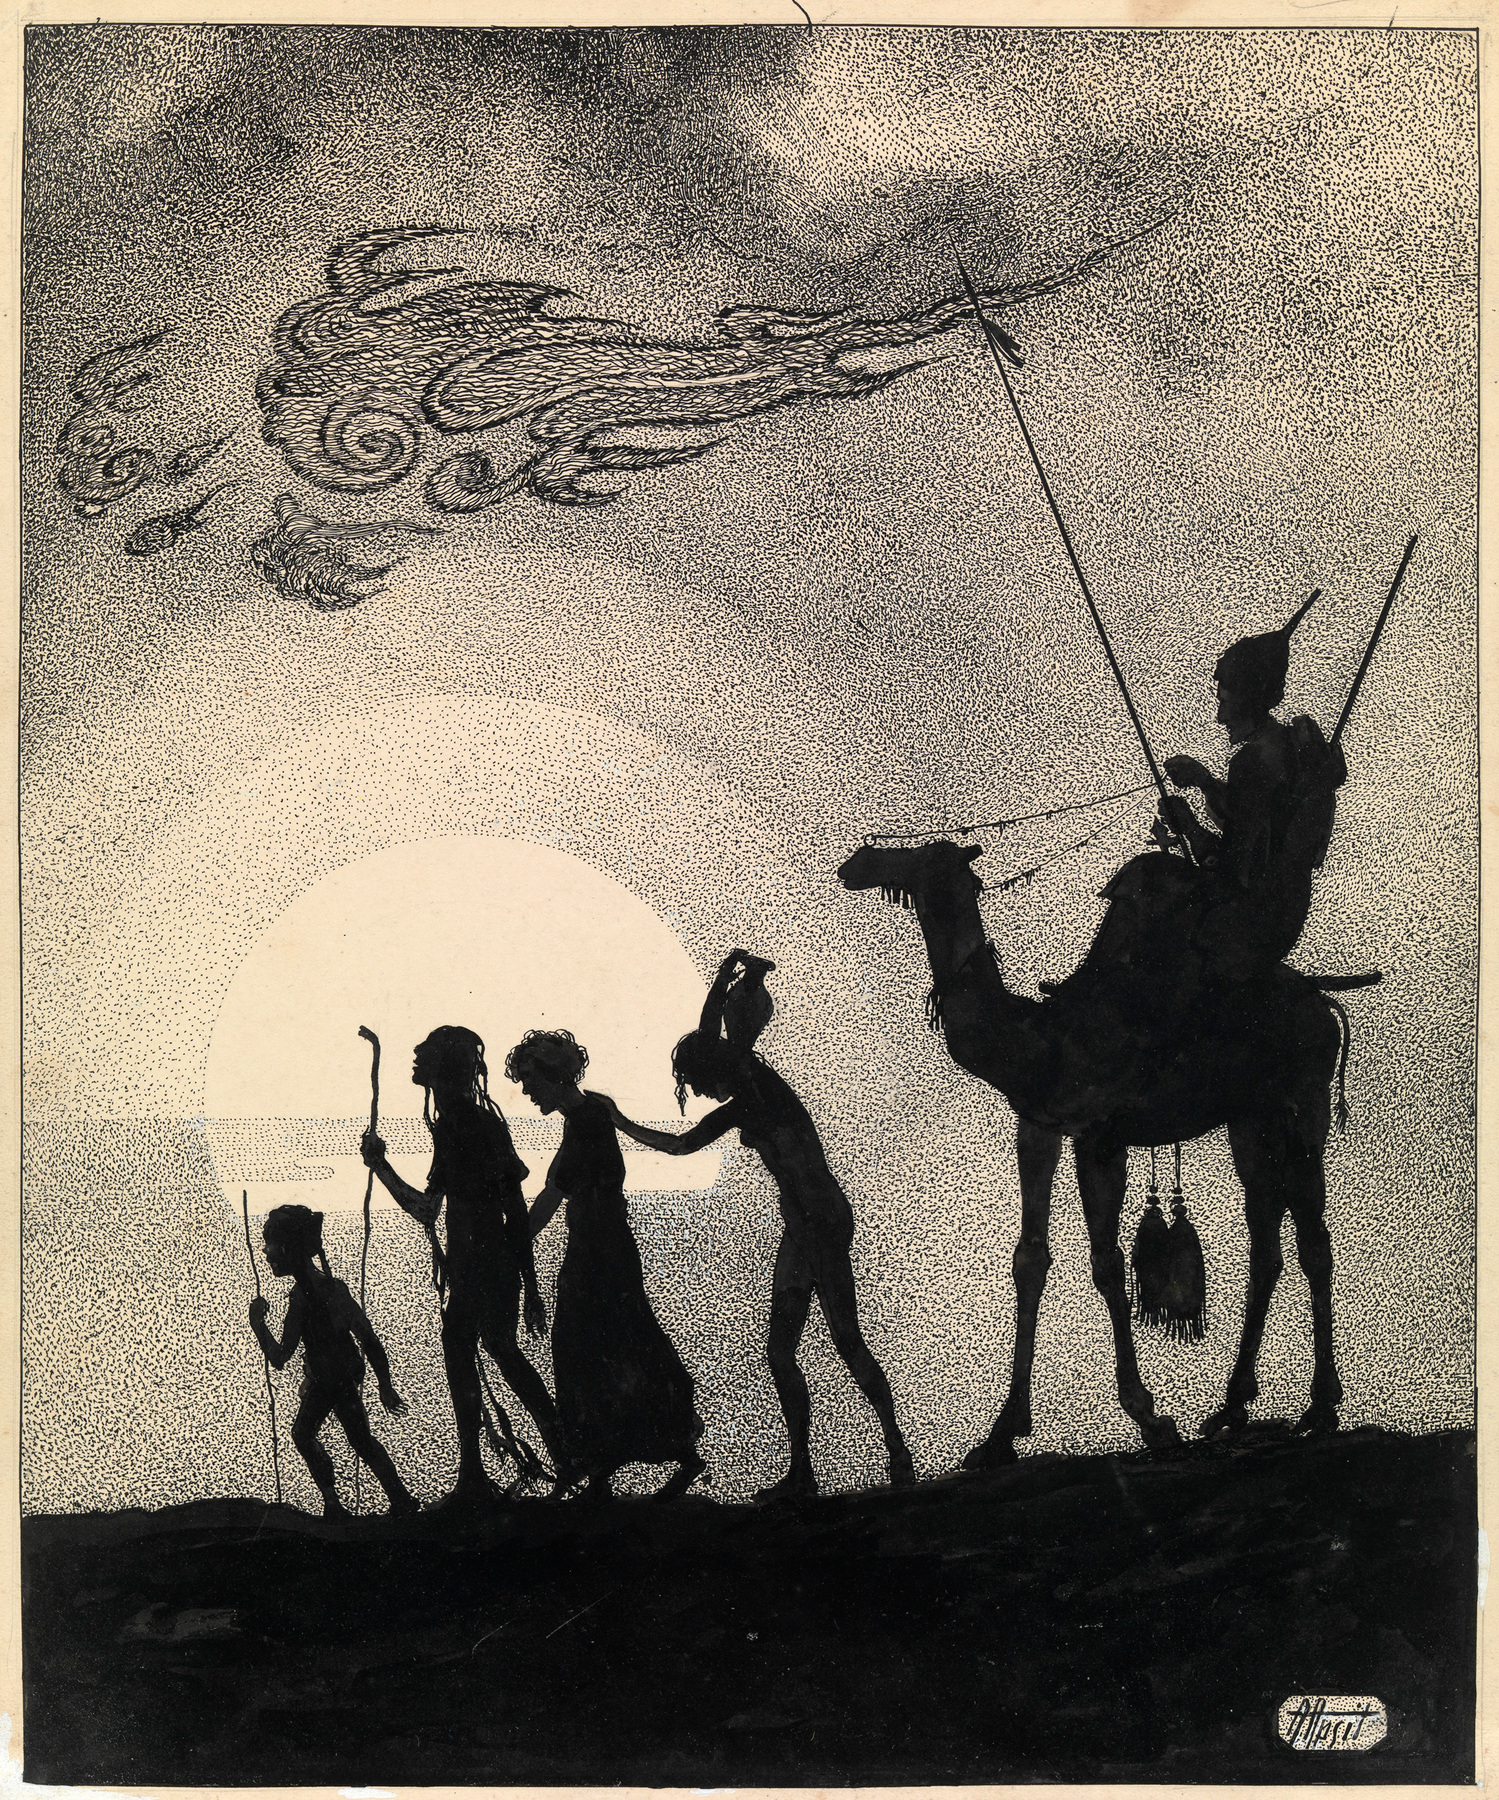 Illustrations for “One Thousand and One Nights”, Including the Tales of  Hassan al Basri on the Island of Wak Wak, 21 works